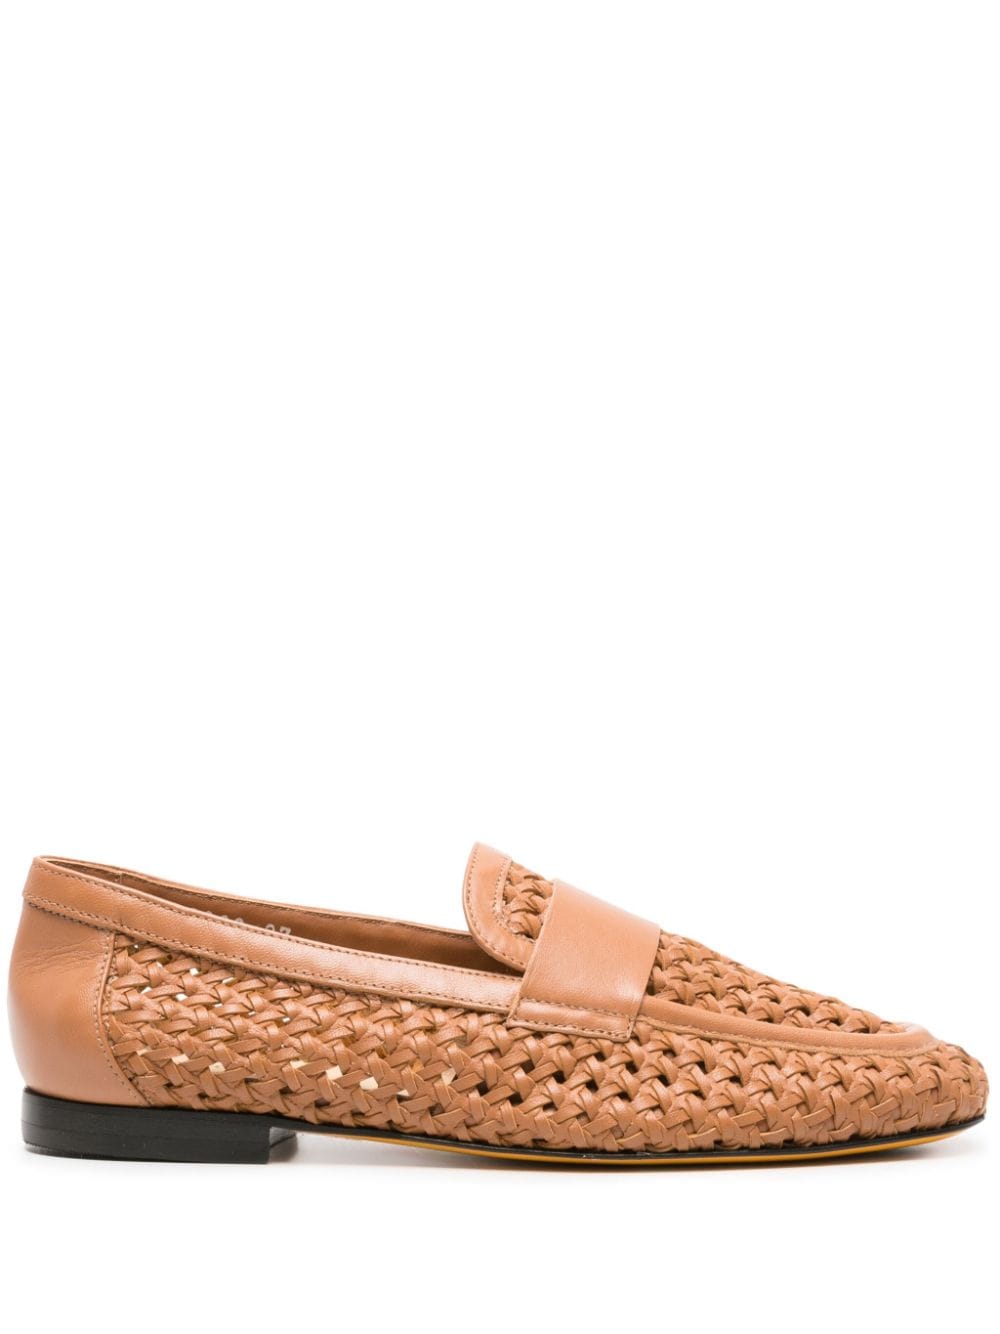 Doucal's Loafer mit Webmuster - Braun von Doucal's